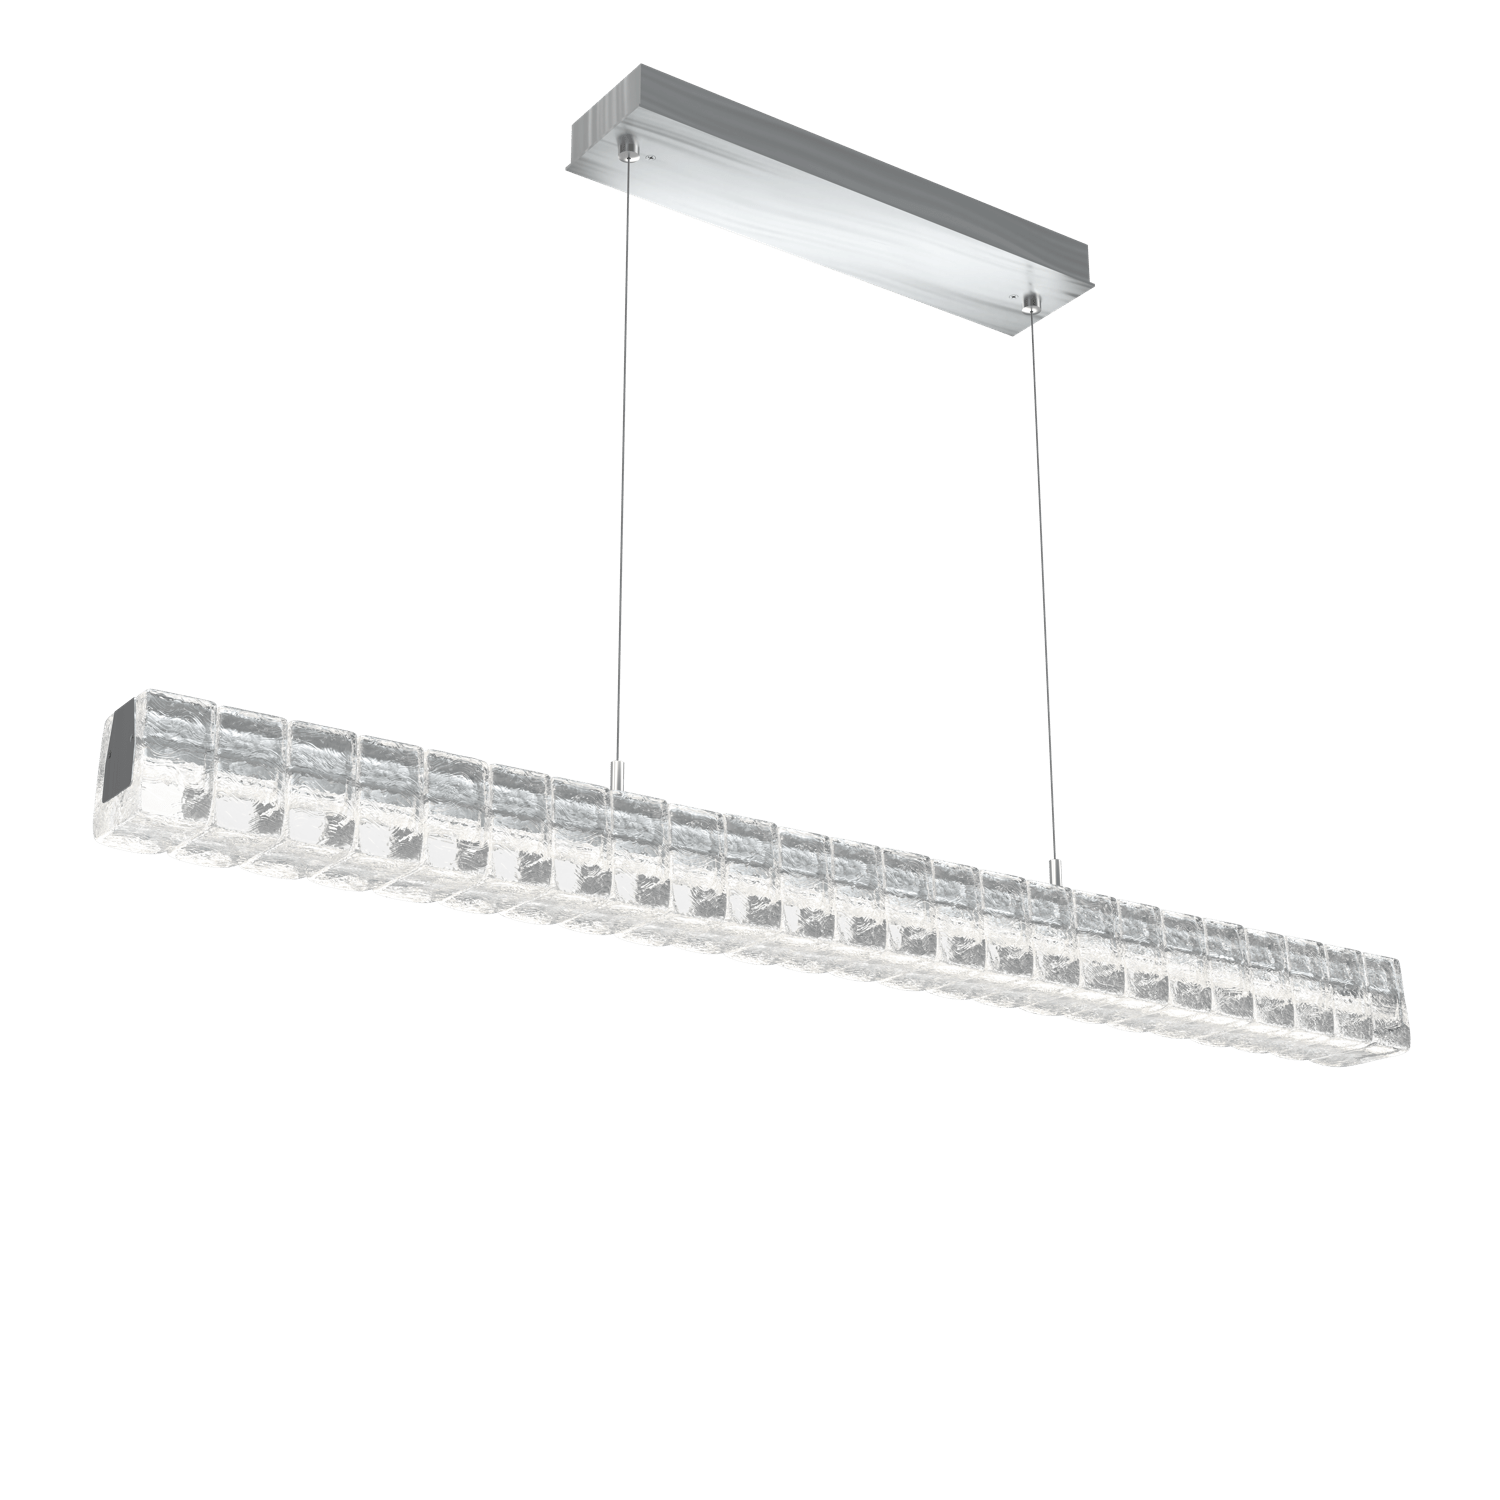 PLB0080-48-SN-Hammerton-Studio-Asscher-48-inch-linear-chandelier-with-satin-nickel-finish-and-clear-cast-glass-shades-and-LED-lamping